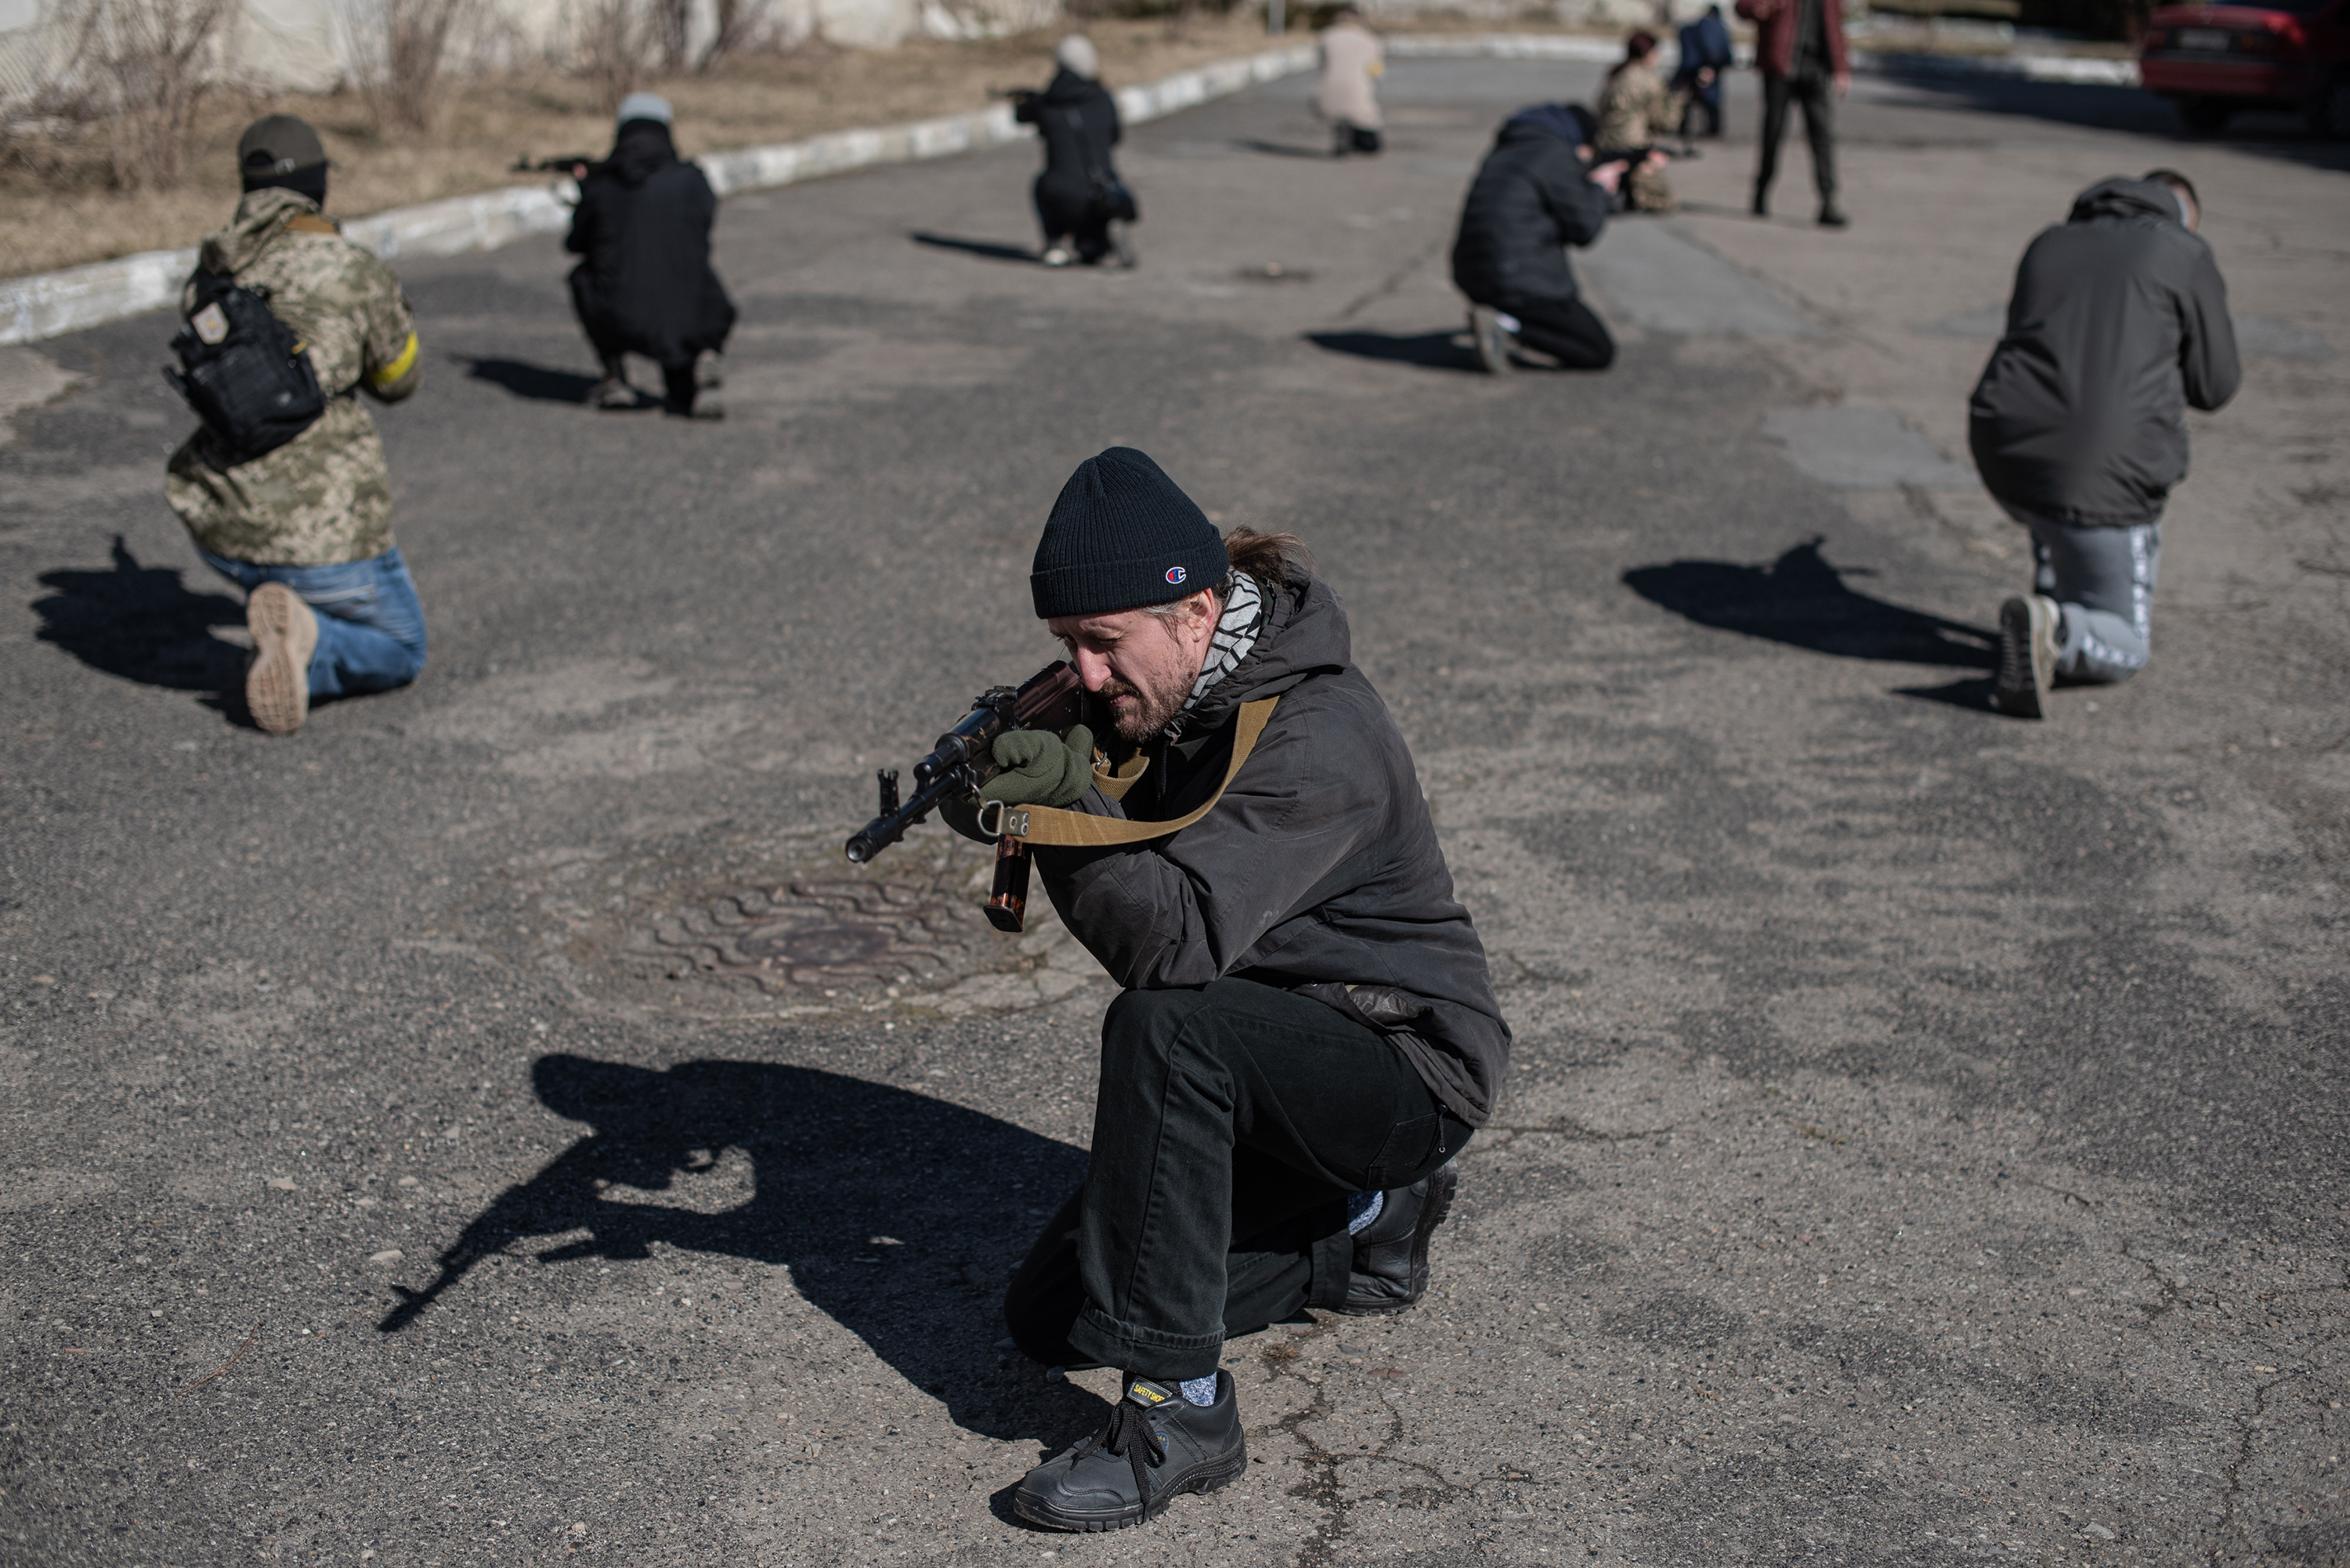 Civilians practice moving in groups at a military training exercise in Ivano-Frankivsk, Ukraine on March 11.